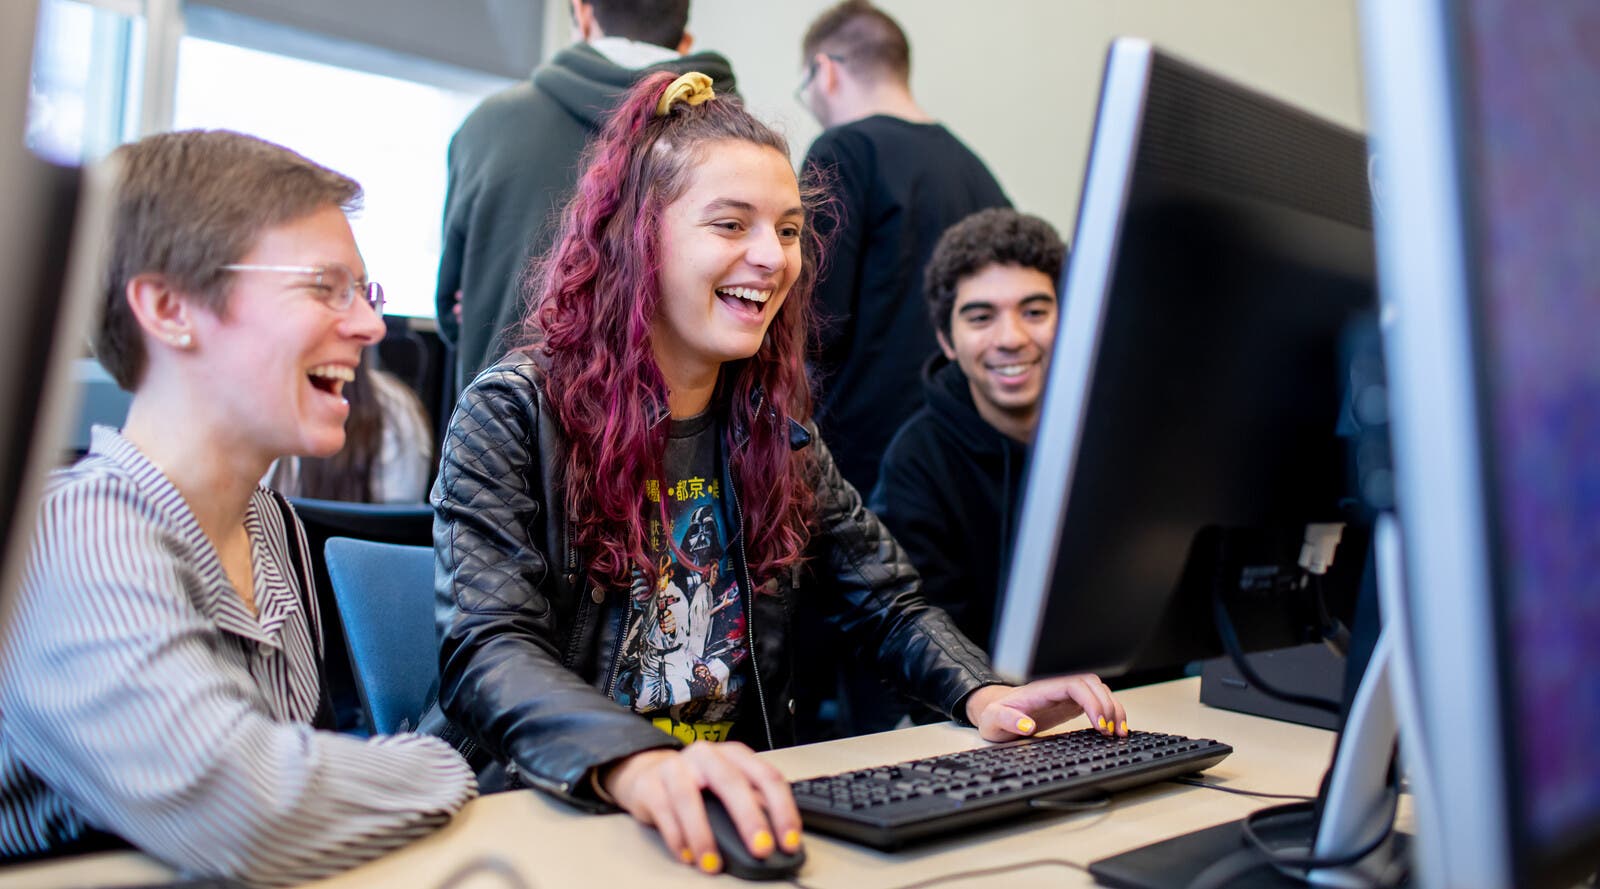 Students using computer and laughing